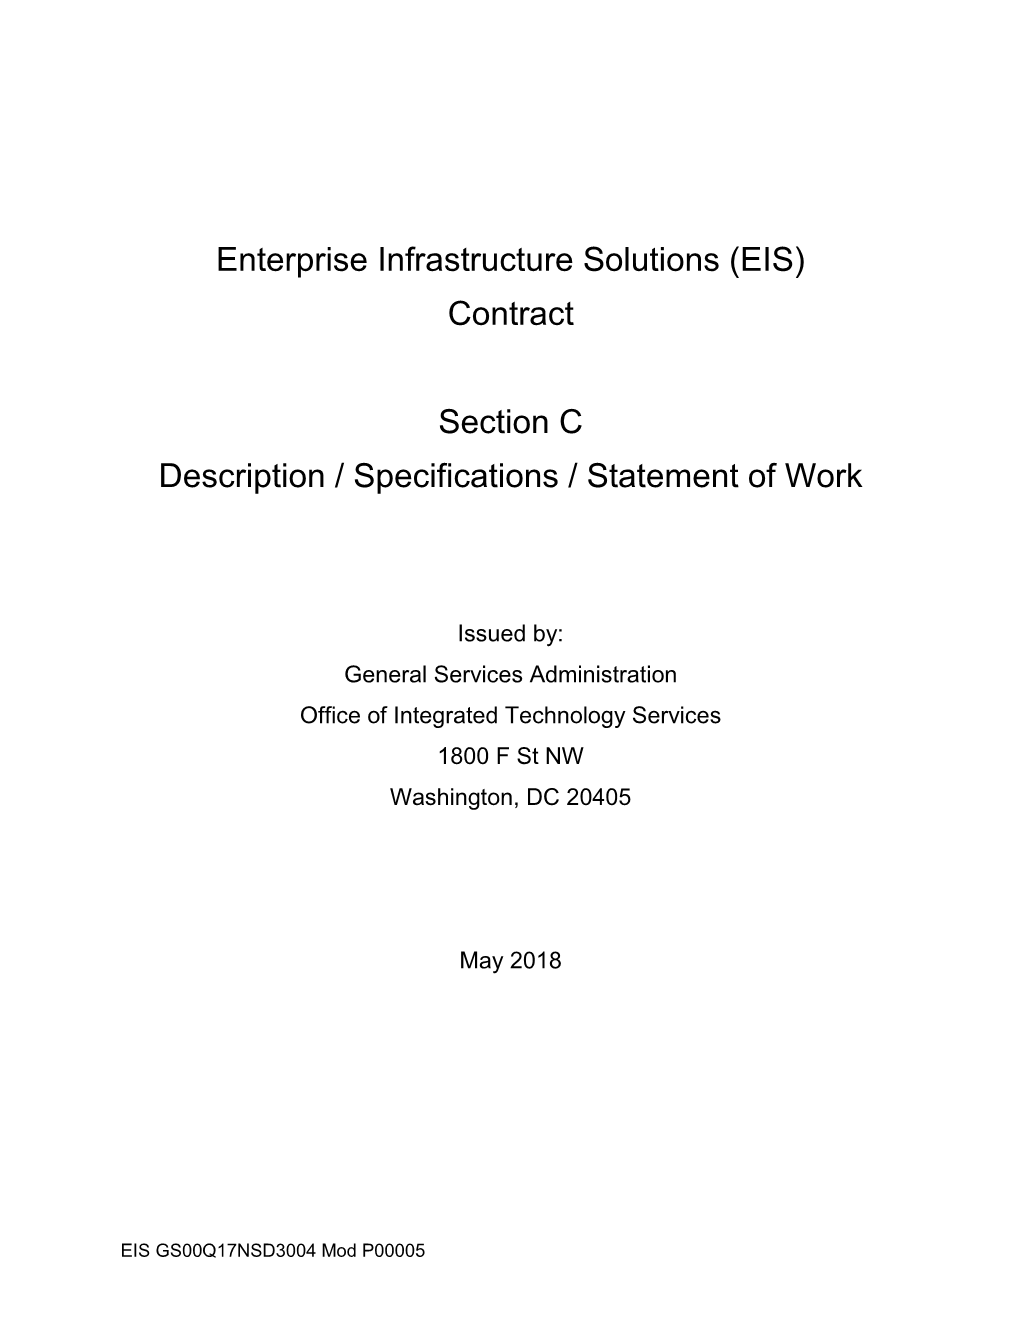 (EIS) Contract Section C Description / Specifications / Statement of Work